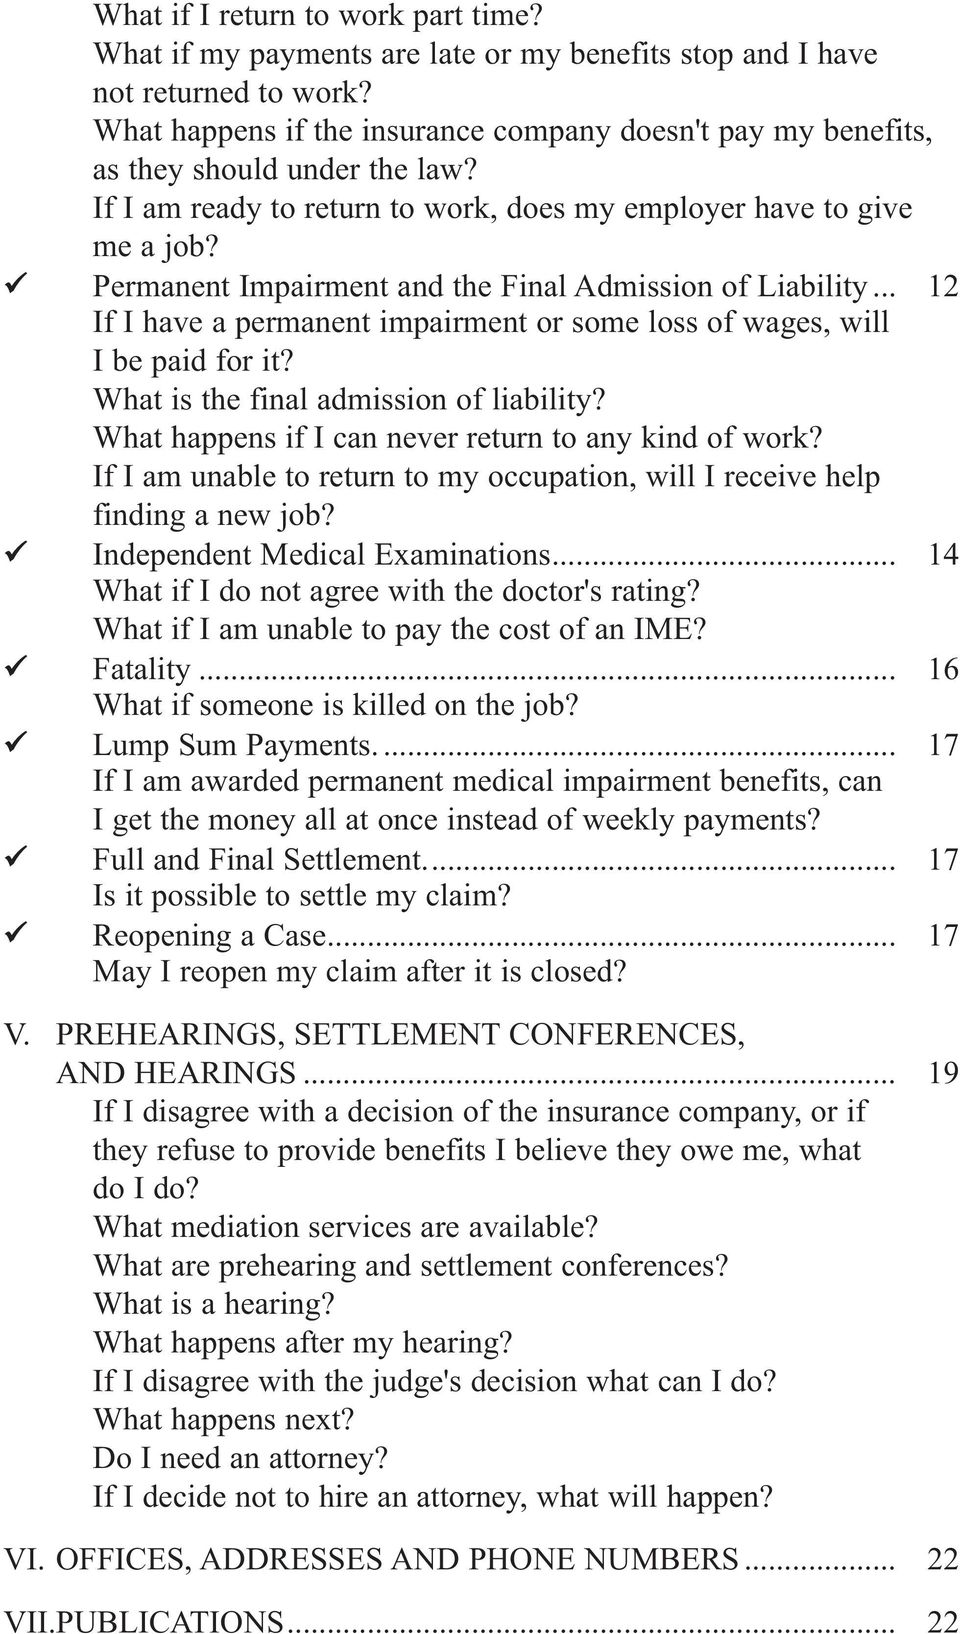 Permanent Impairment and the Final Admission of Liability... 12 If I have a permanent impairment or some loss of wages, will I be paid for it? What is the final admission of liability?